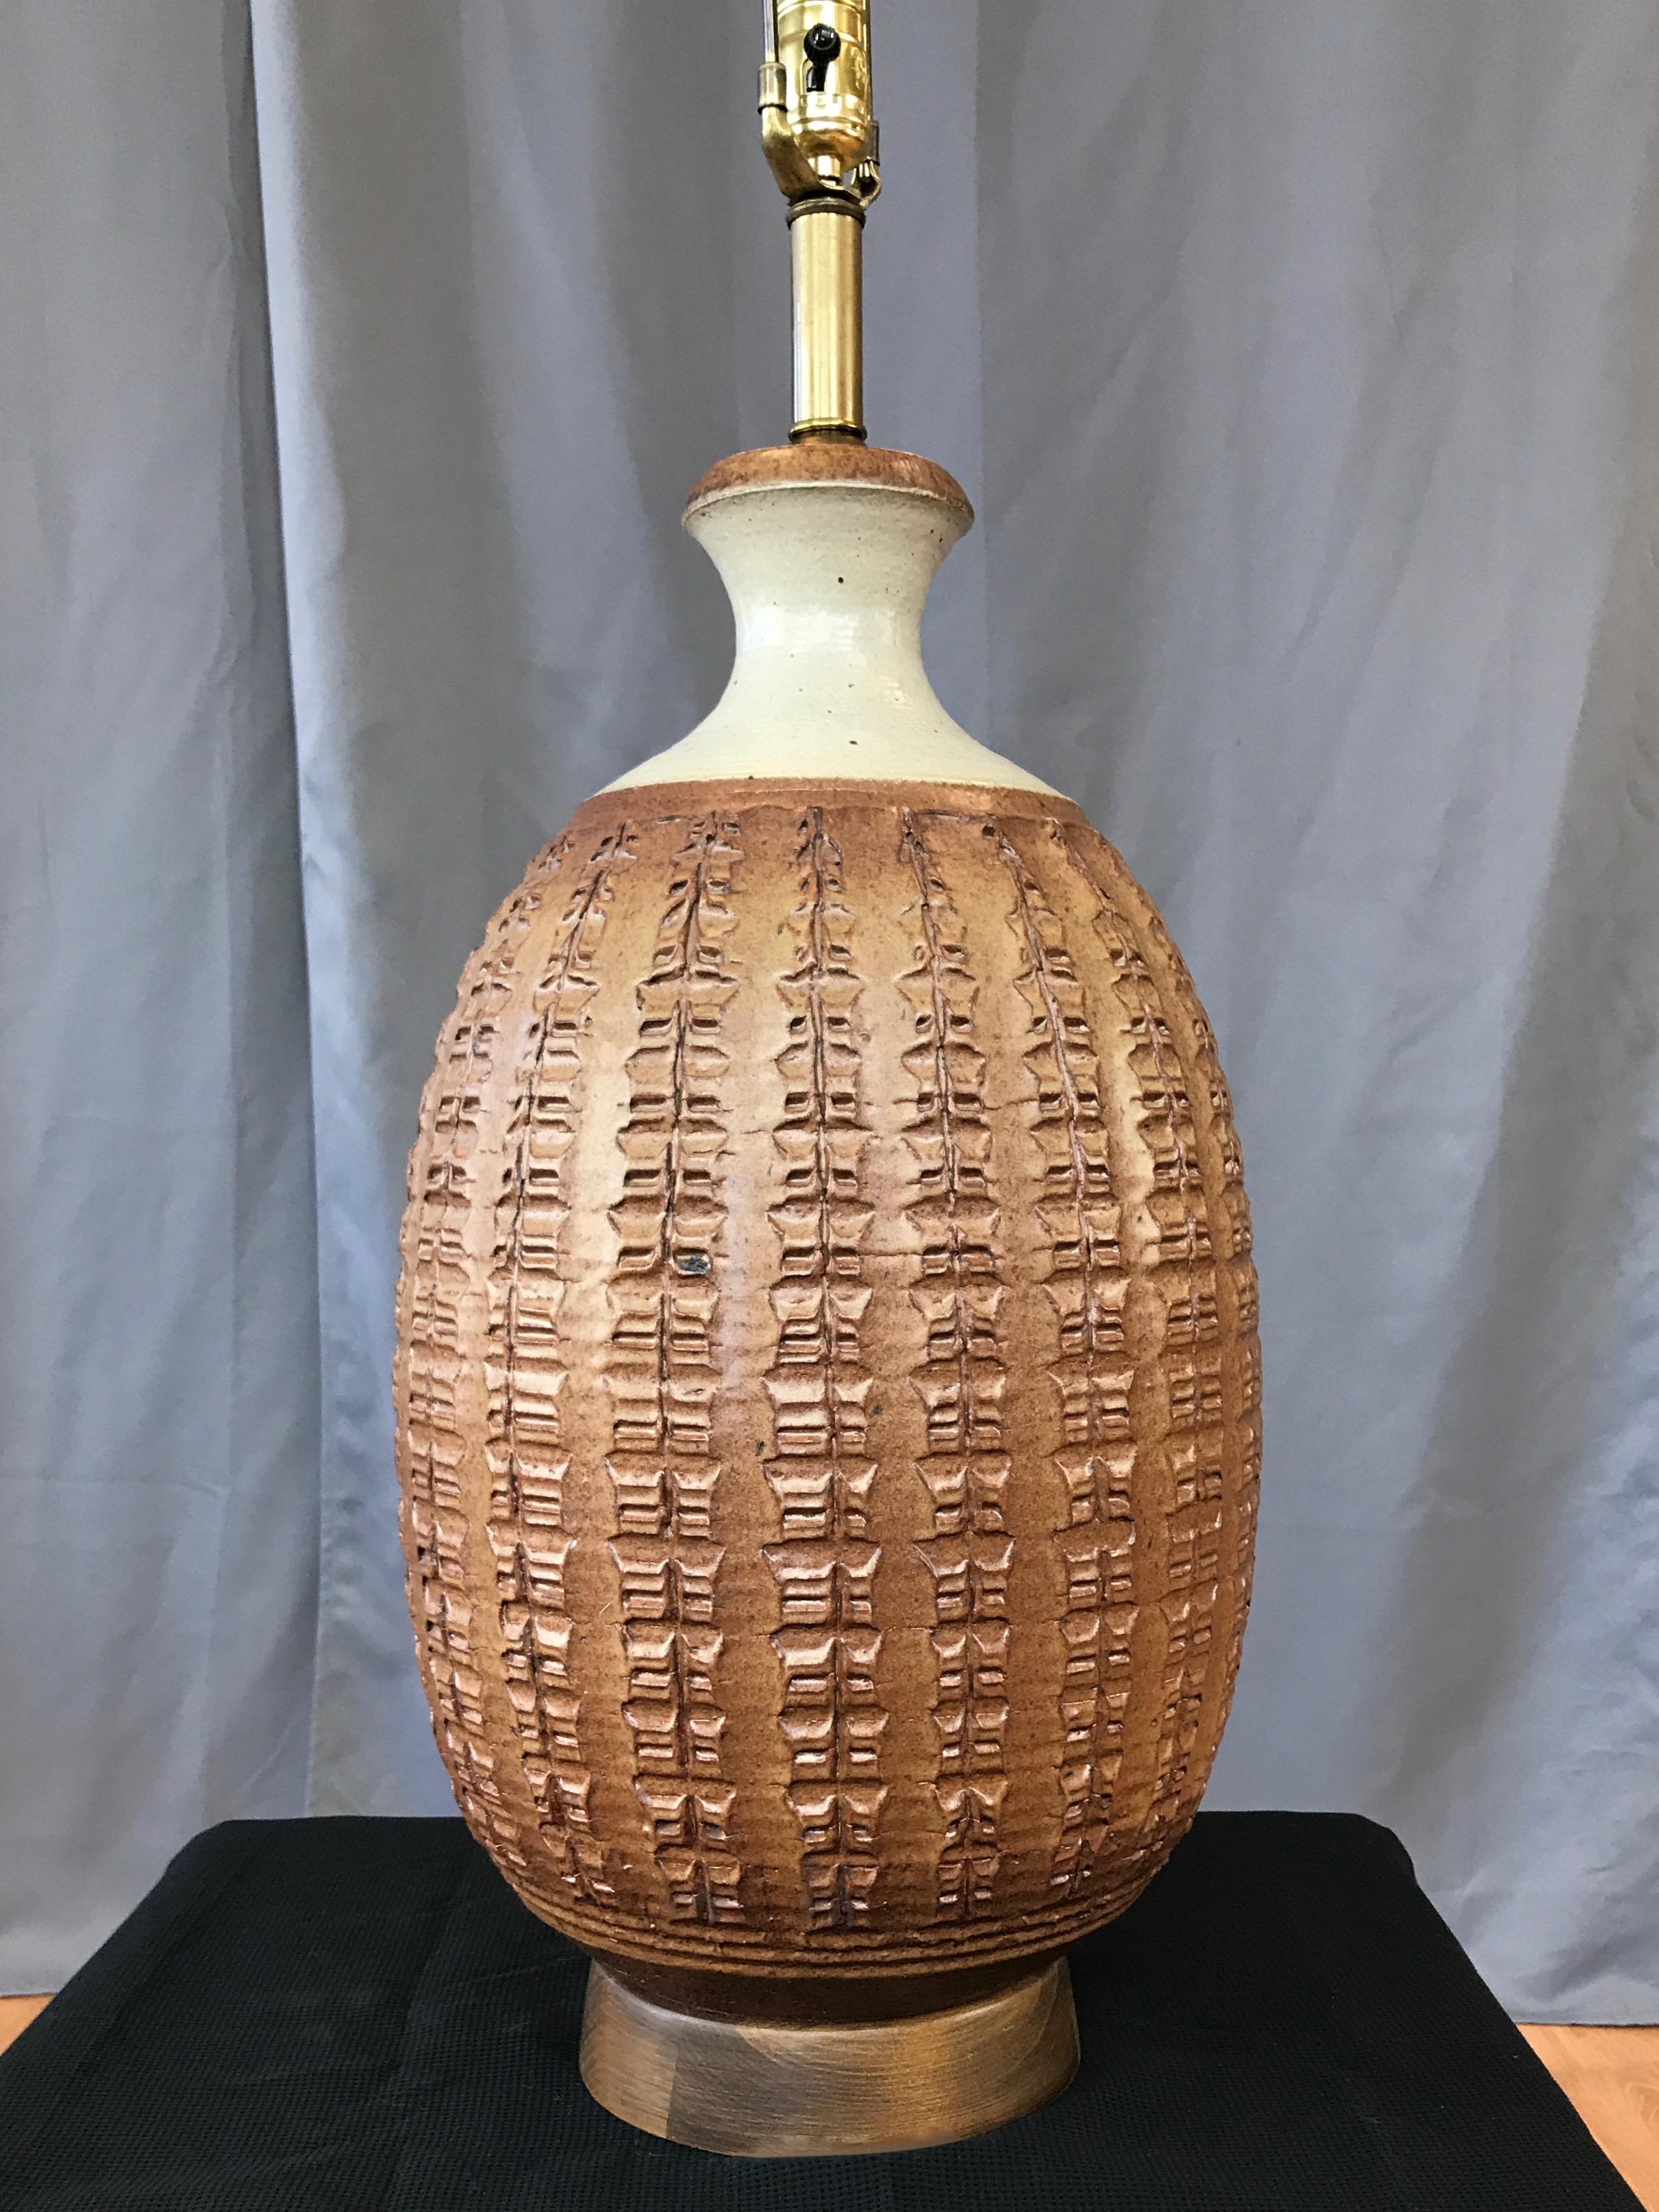 A monumental Affiliated Craftsmen Z Series stoneware table lamp by important and influential California Studio Pottery and ceramic artist Bob Kinzie.

Technically challenging and physically demanding extra-large hand-thrown Moroccan red clay form,